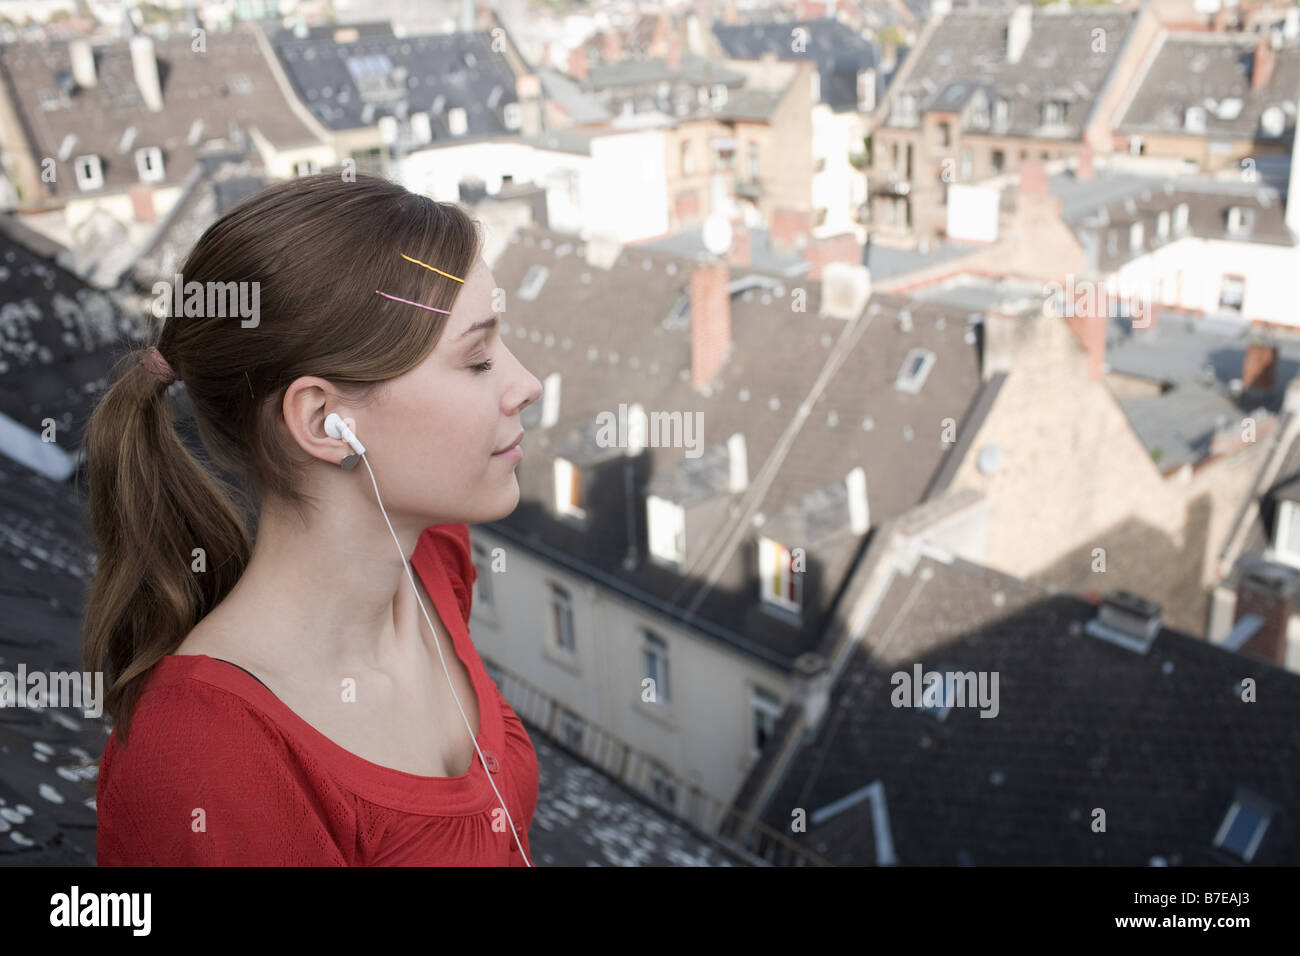 Teenage girl listening to music Banque D'Images